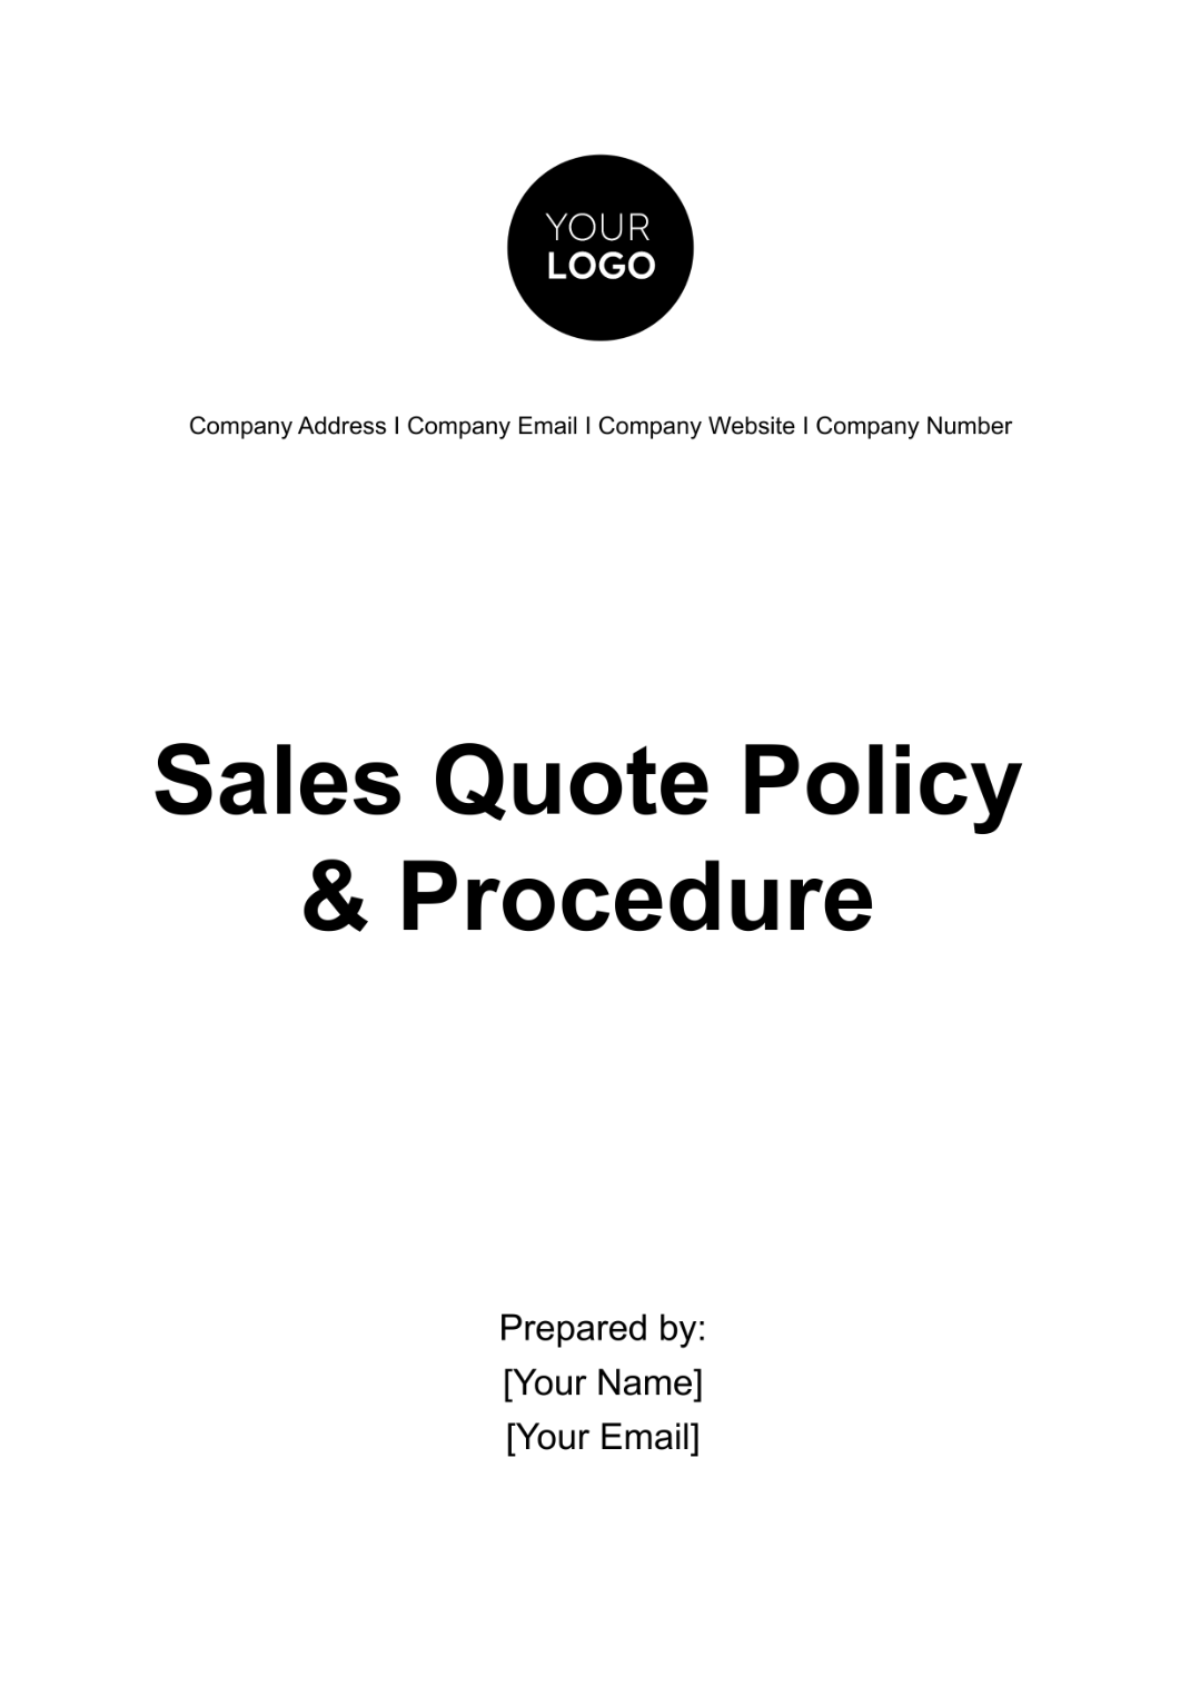 Sales Quote Policy & Procedure Template